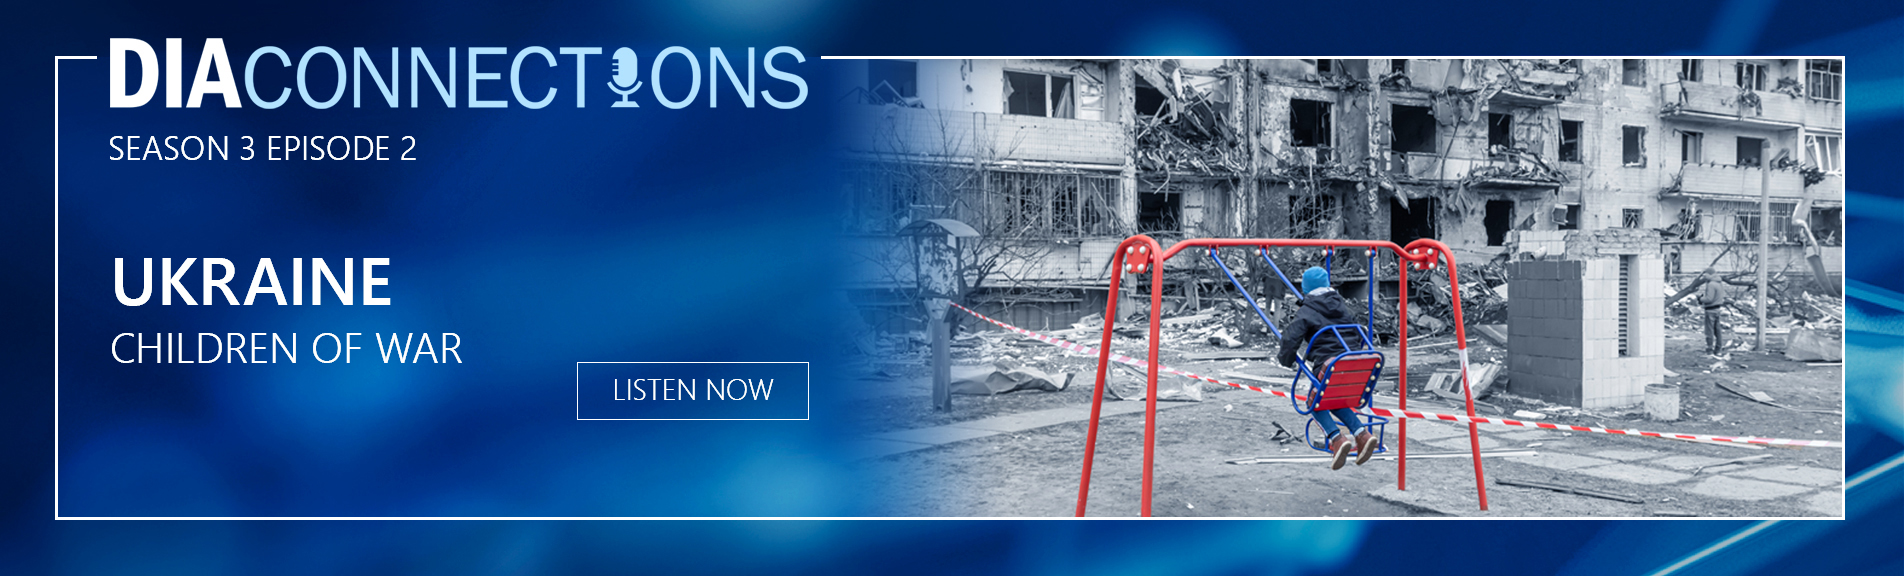 Image of a blue background with a title. D.I.A. Connections. Subtitle. Season 3. Episode 2. With text below that reads. Ukraine. Children of War. And a button that reads. Listen Now. On the right half of the image is a black and white scene of a war-torn Ukraine residential area. In the foreground is a red-colored swingset with boy swinging. To the right. Caution tape is strung with wreckage on the other side.